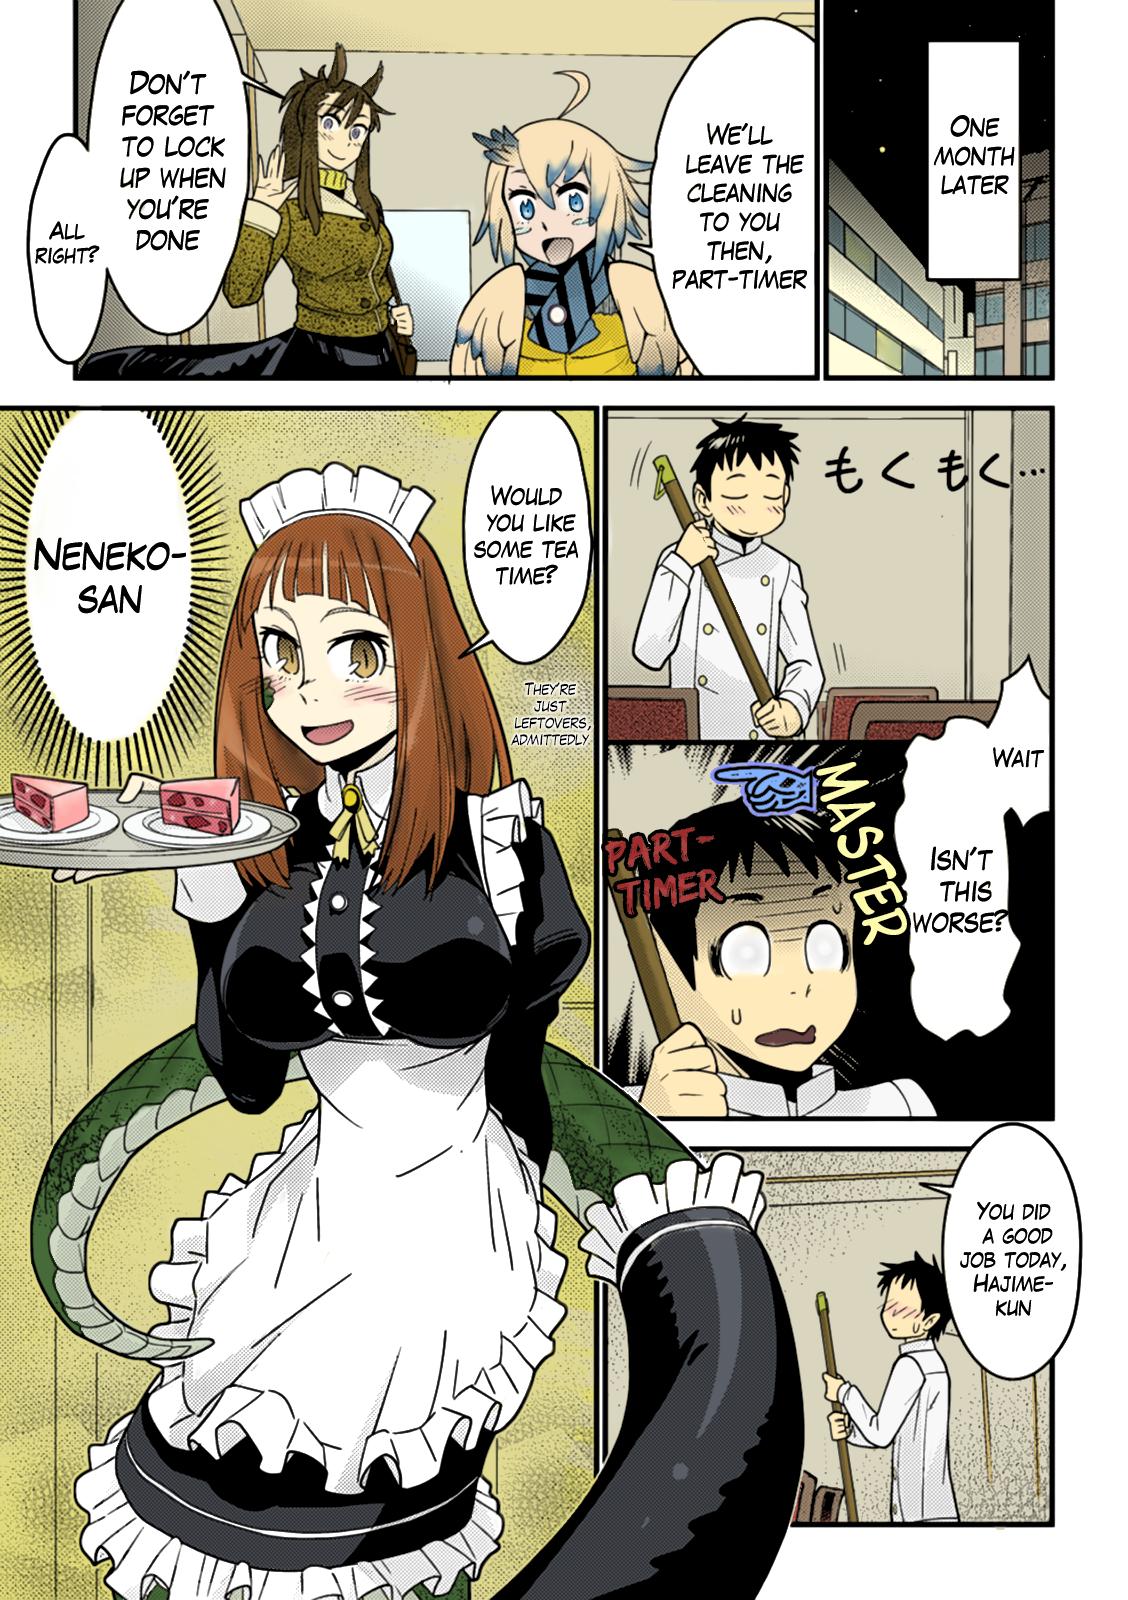 Hot Milf Mon Cafe Yori Ai o Kominute | With Love, the Monster Cafe Dad - Page 3